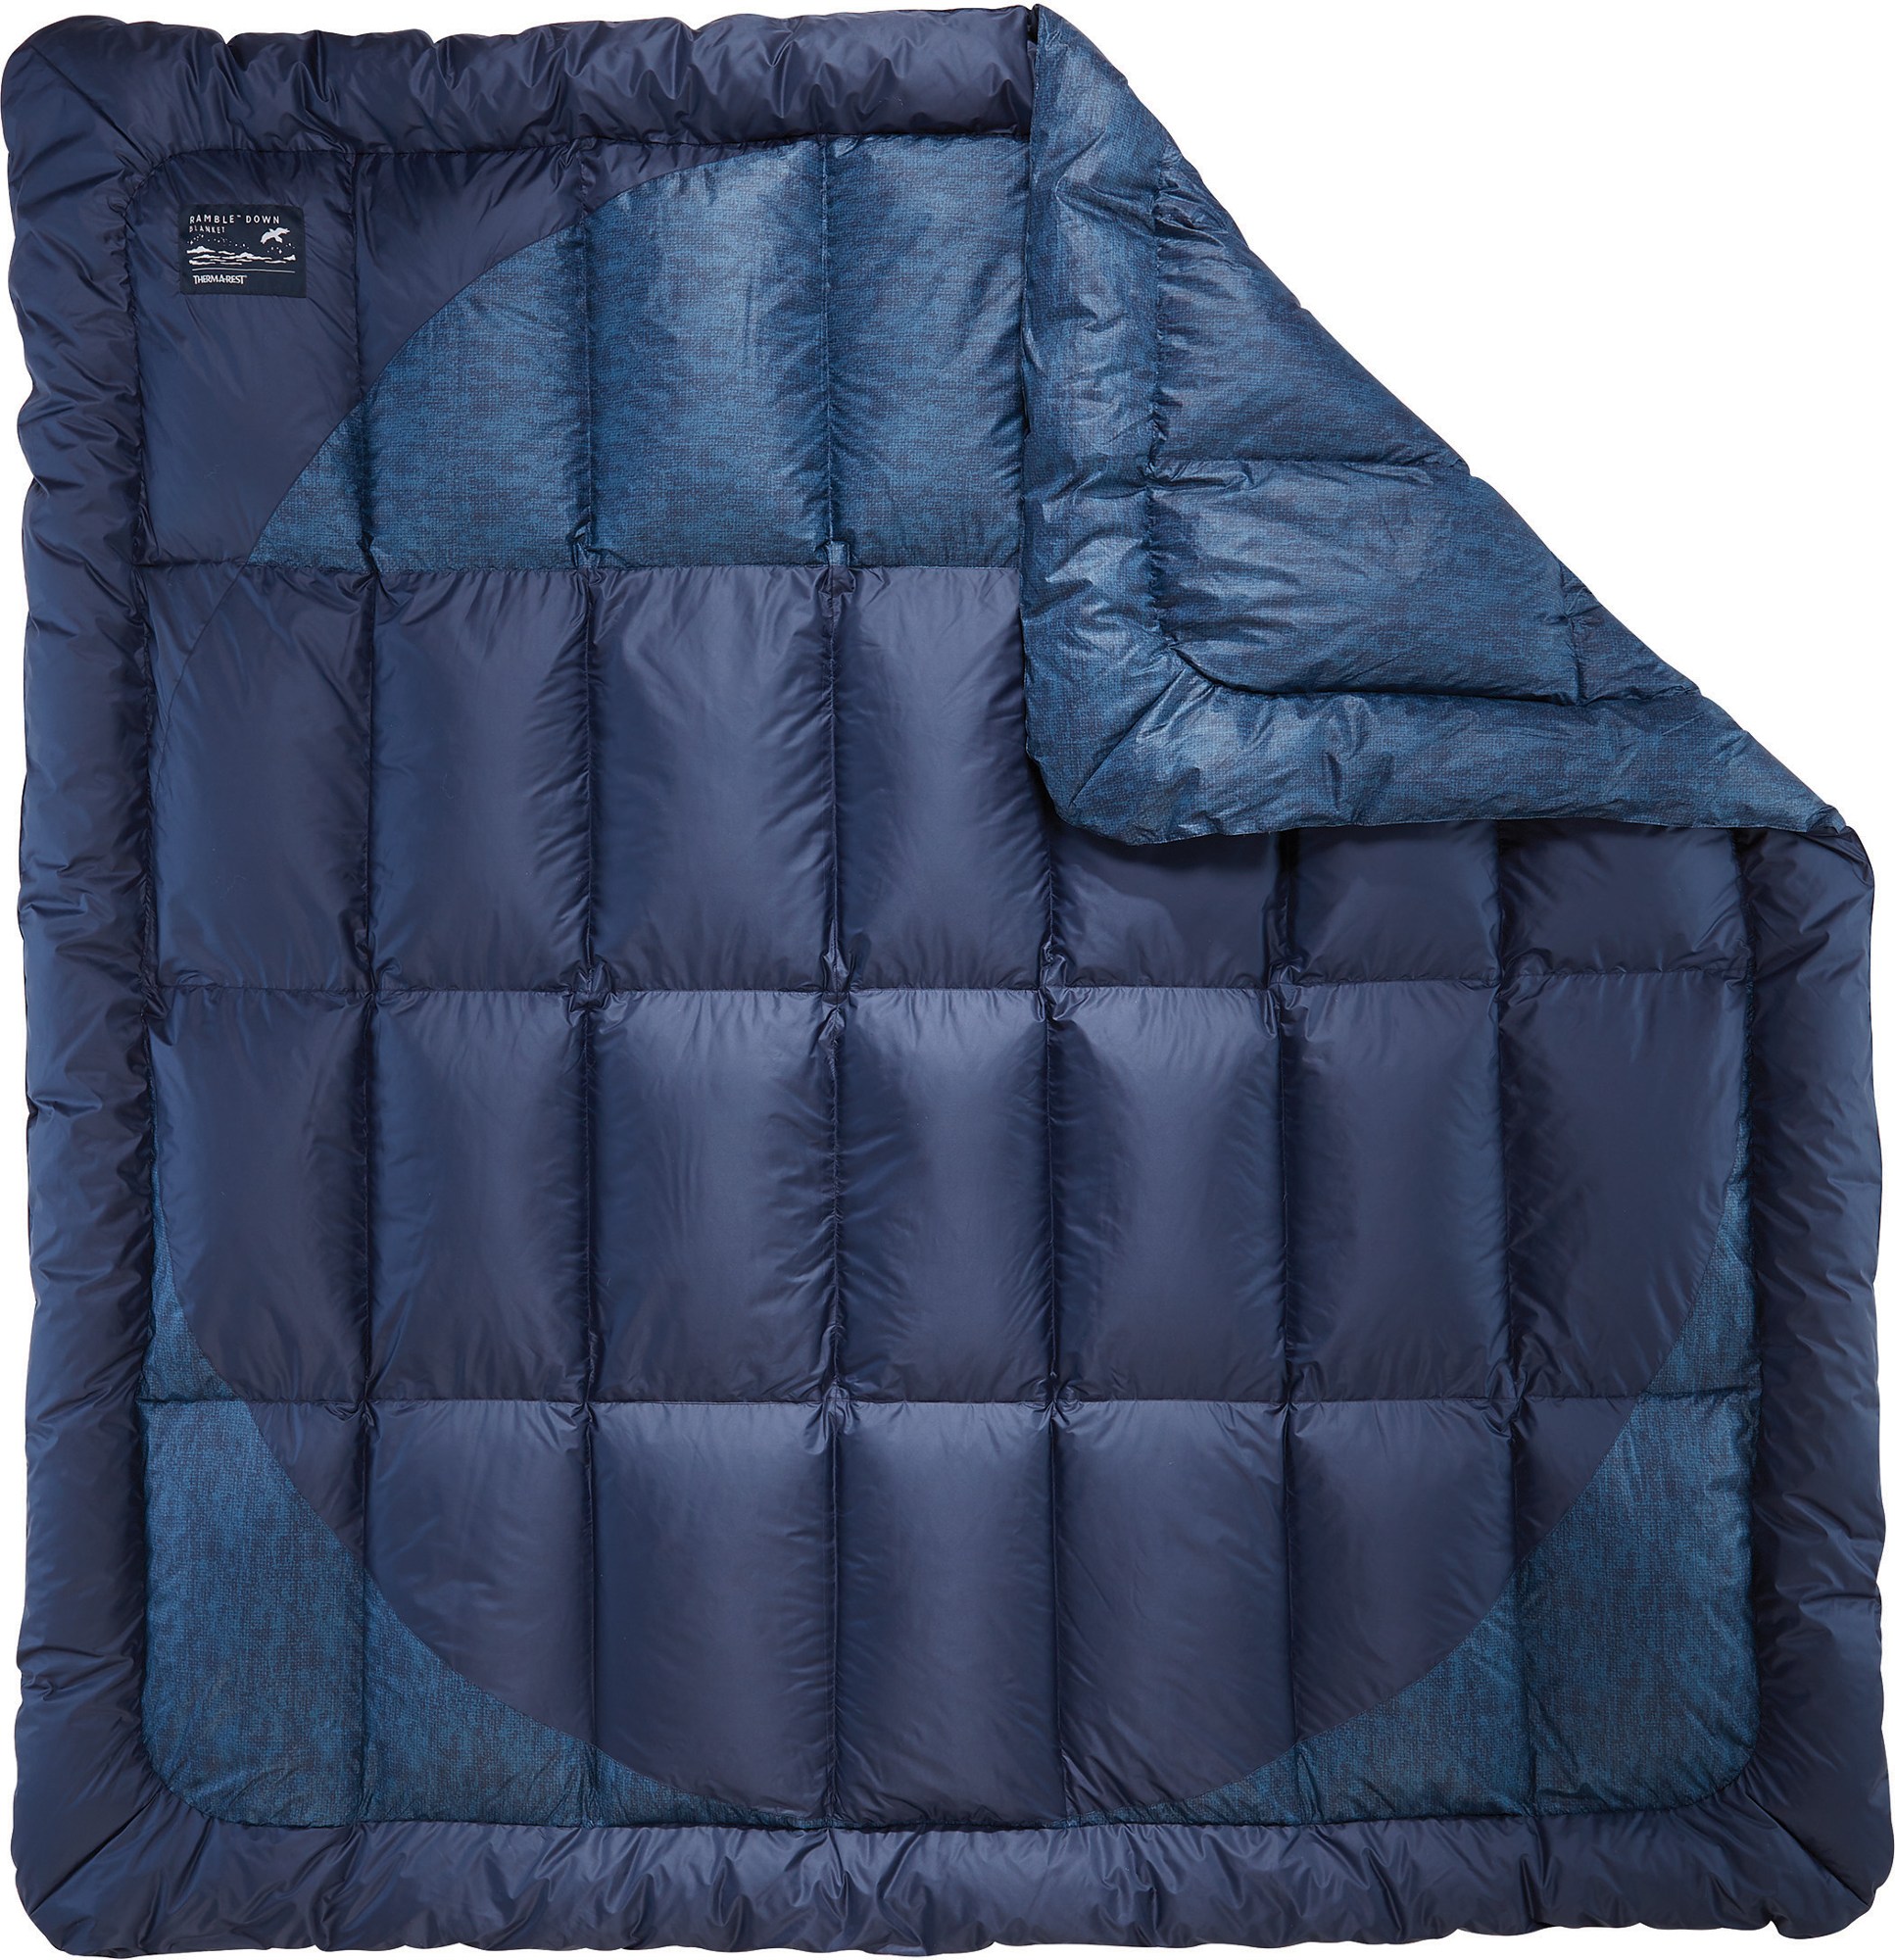 Одеяло Ramble Down Therm-a-Rest, синий корус 20 одеяло therm a rest желтый